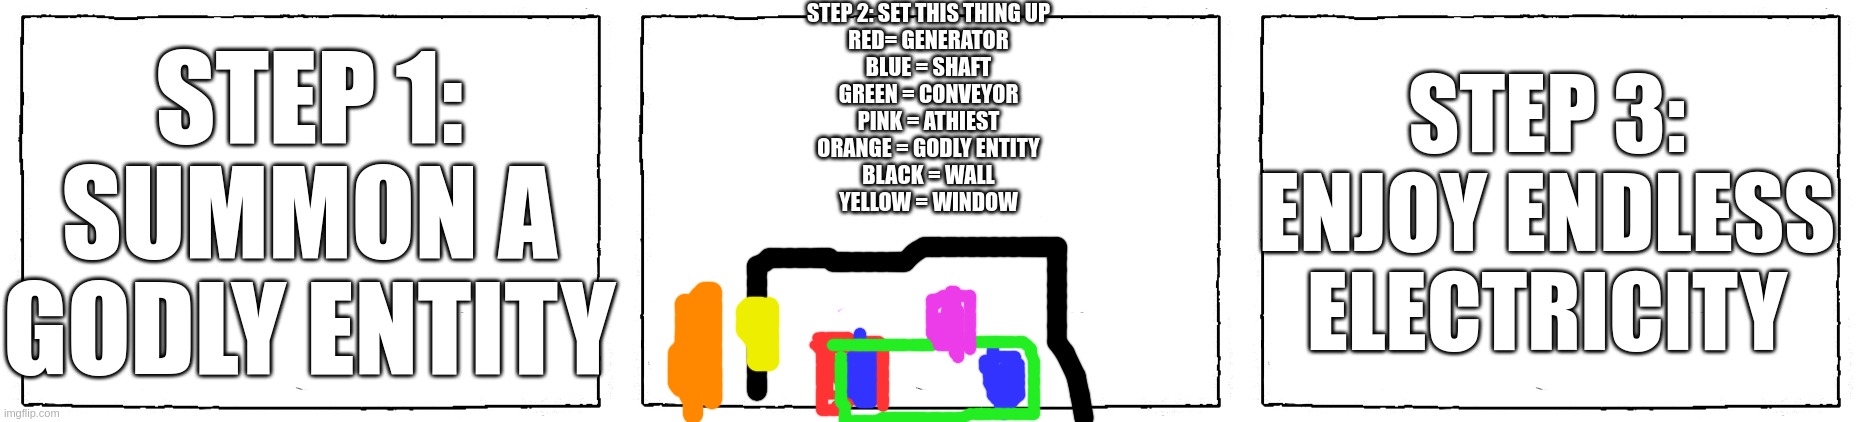 part 2/2 | STEP 1: SUMMON A GODLY ENTITY; STEP 2: SET THIS THING UP
RED= GENERATOR
BLUE = SHAFT
GREEN = CONVEYOR
PINK = ATHIEST
ORANGE = GODLY ENTITY
BLACK = WALL
YELLOW = WINDOW; STEP 3: ENJOY ENDLESS ELECTRICITY | image tagged in comic blank panel | made w/ Imgflip meme maker